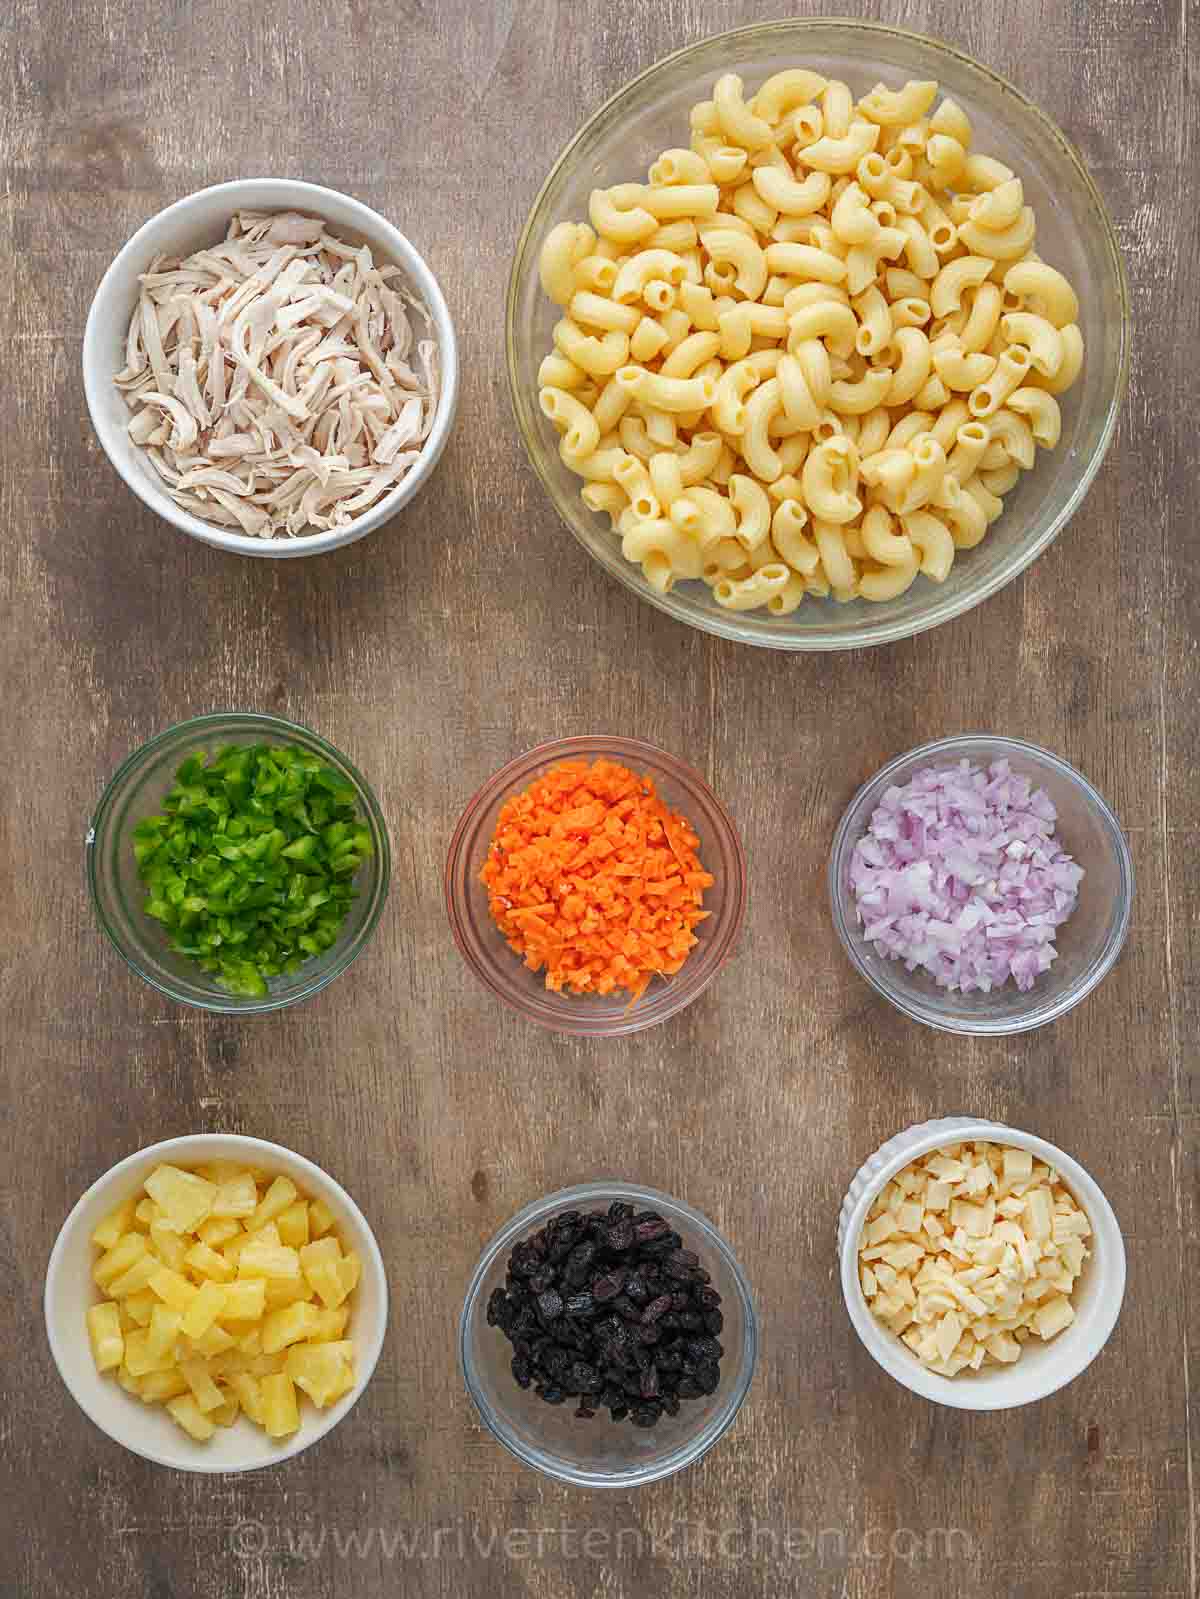 cooked macaroni, pineapple, cheese, raisins, carrots, bell pepper and shredded chicken.